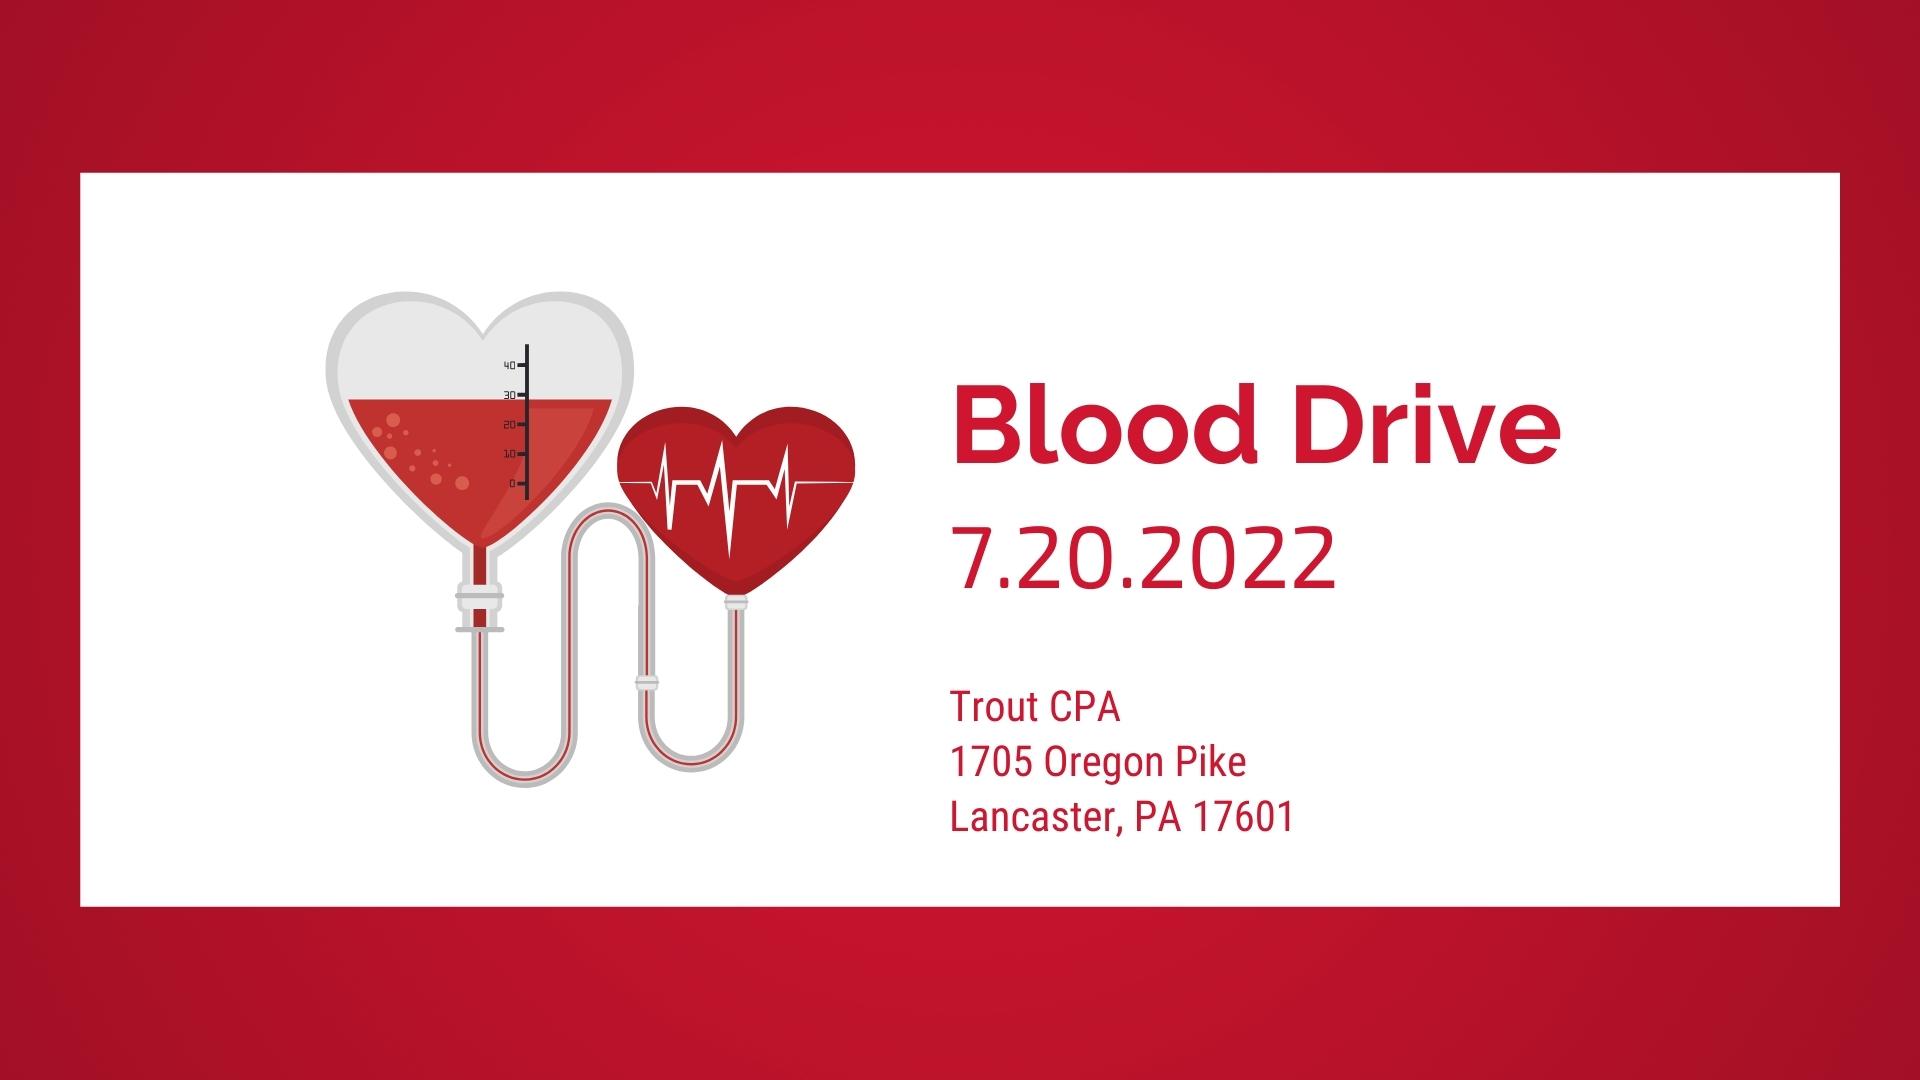 Trout CPA Hosts Blood Drive on July 20th